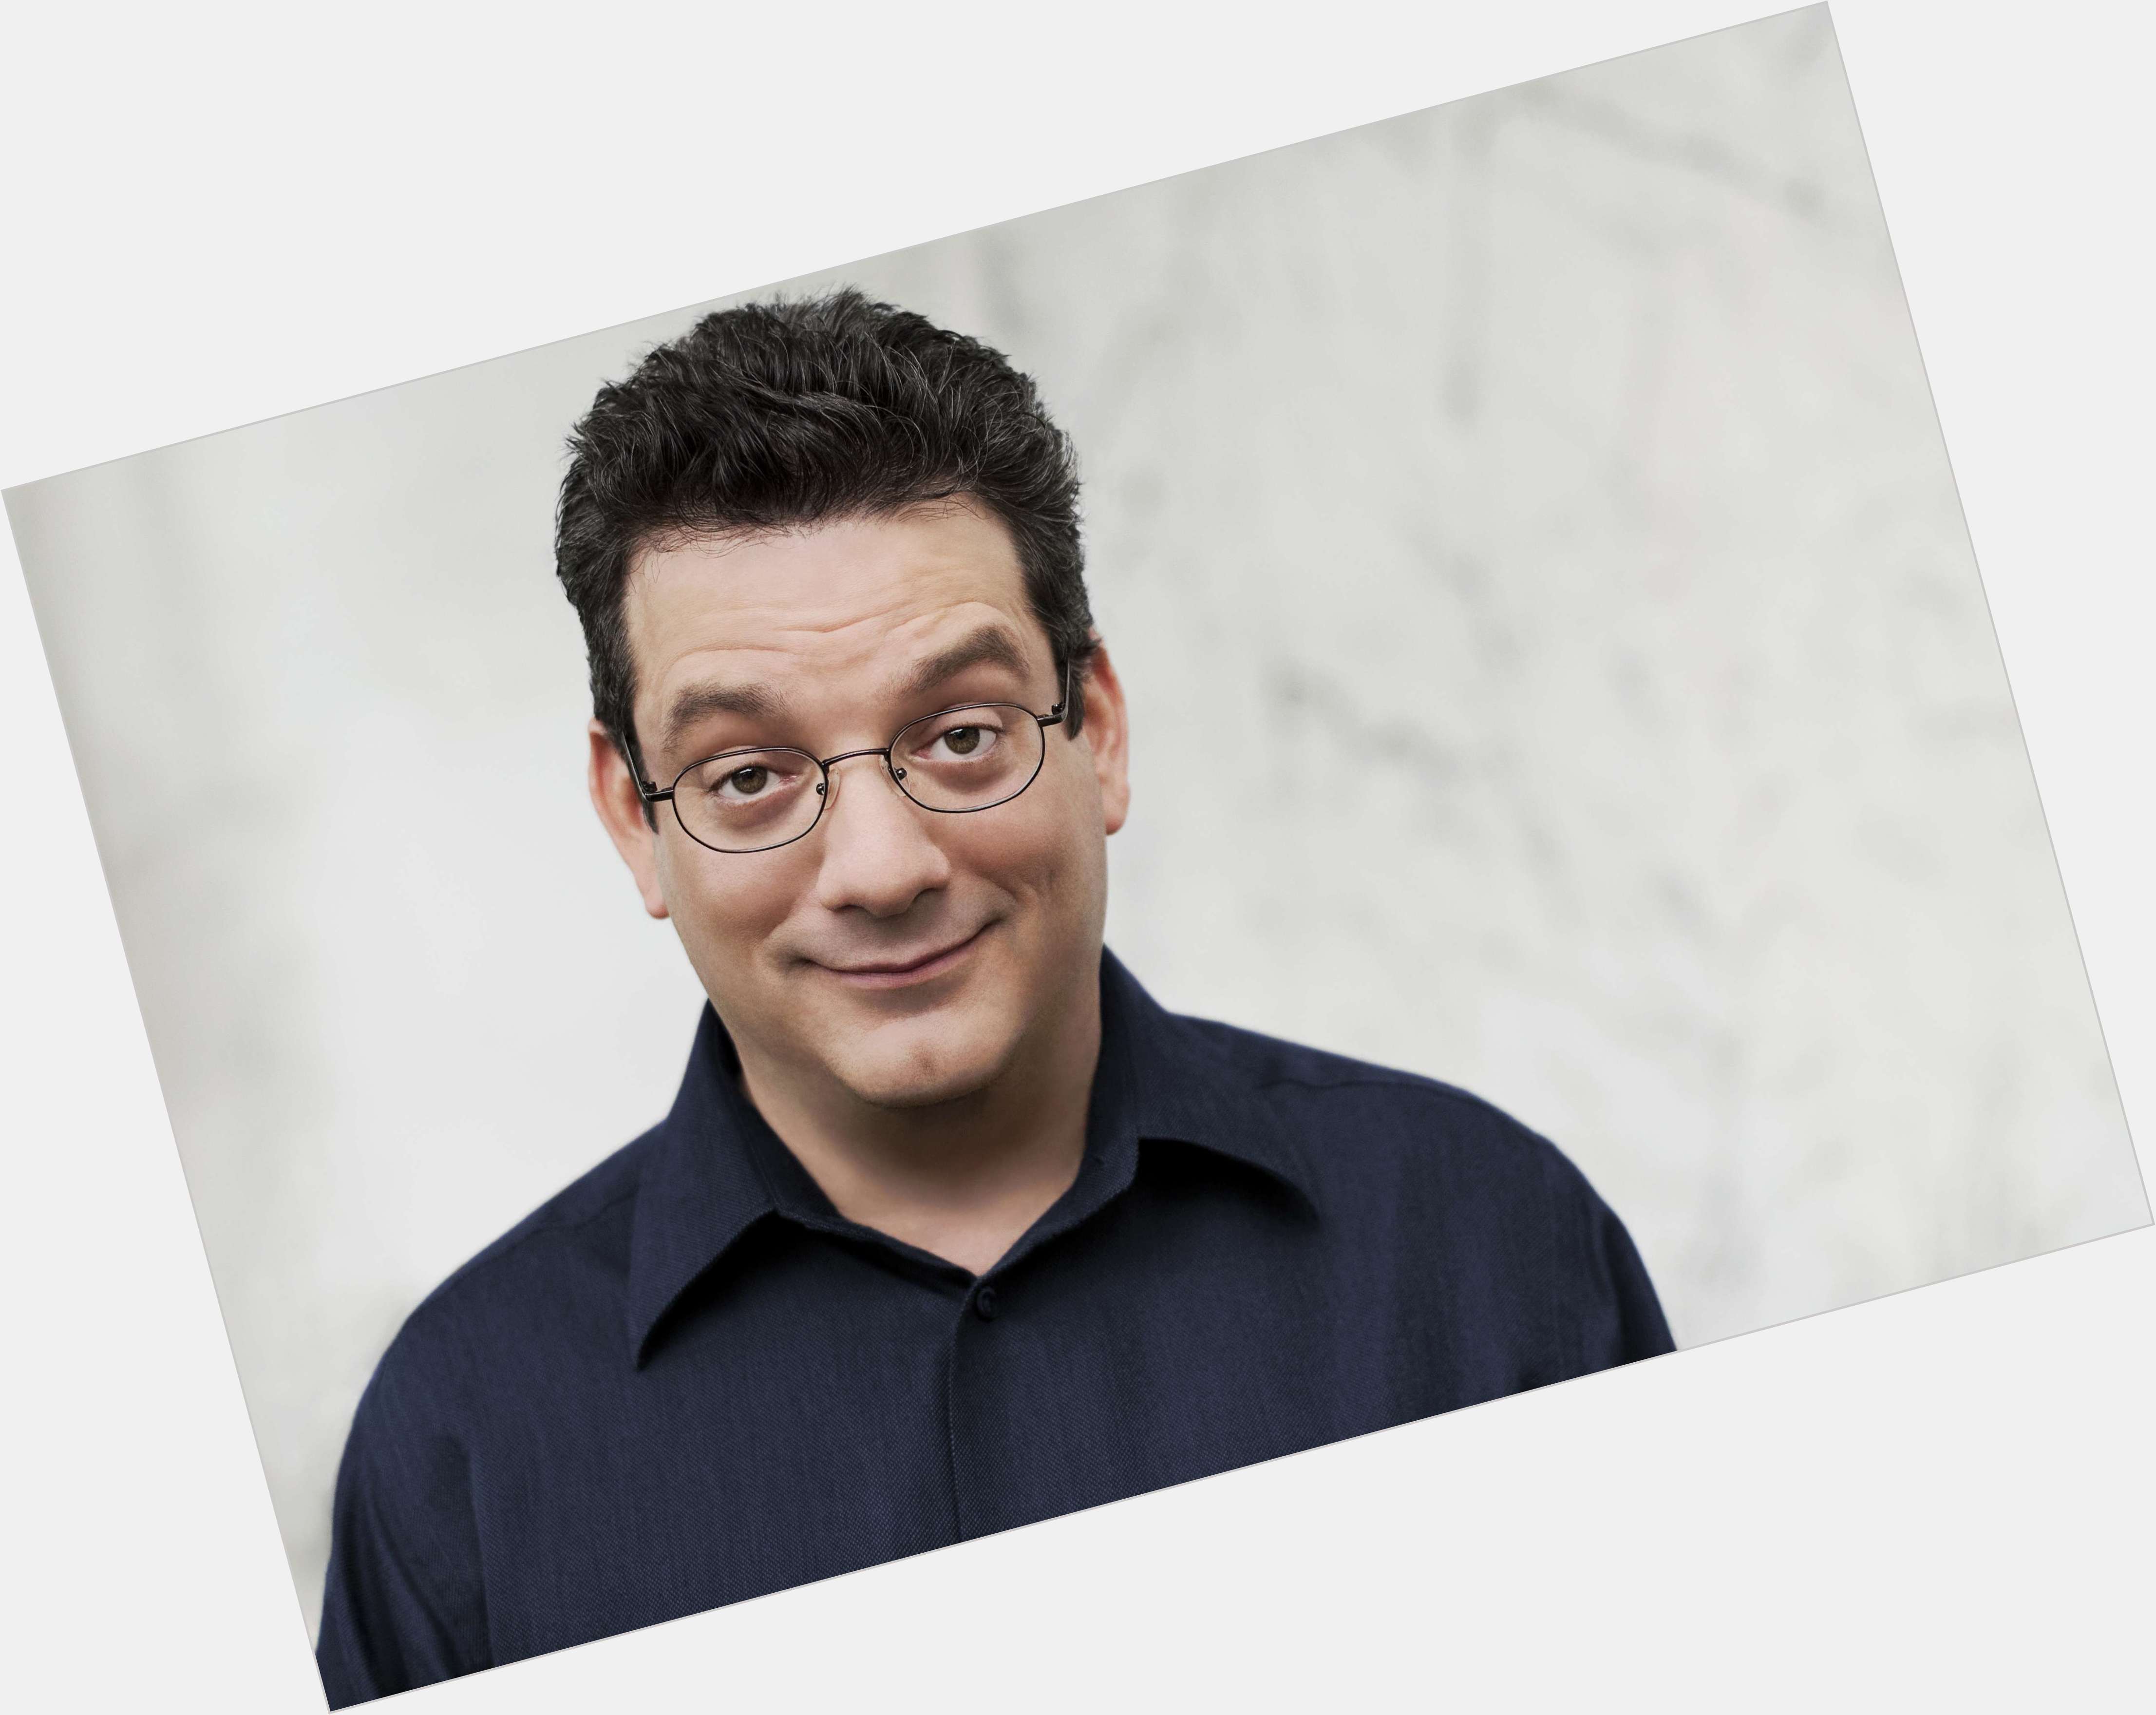 <a href="/hot-men/andy-kindler/is-he-funny-married-tall">Andy Kindler</a> Large body,  